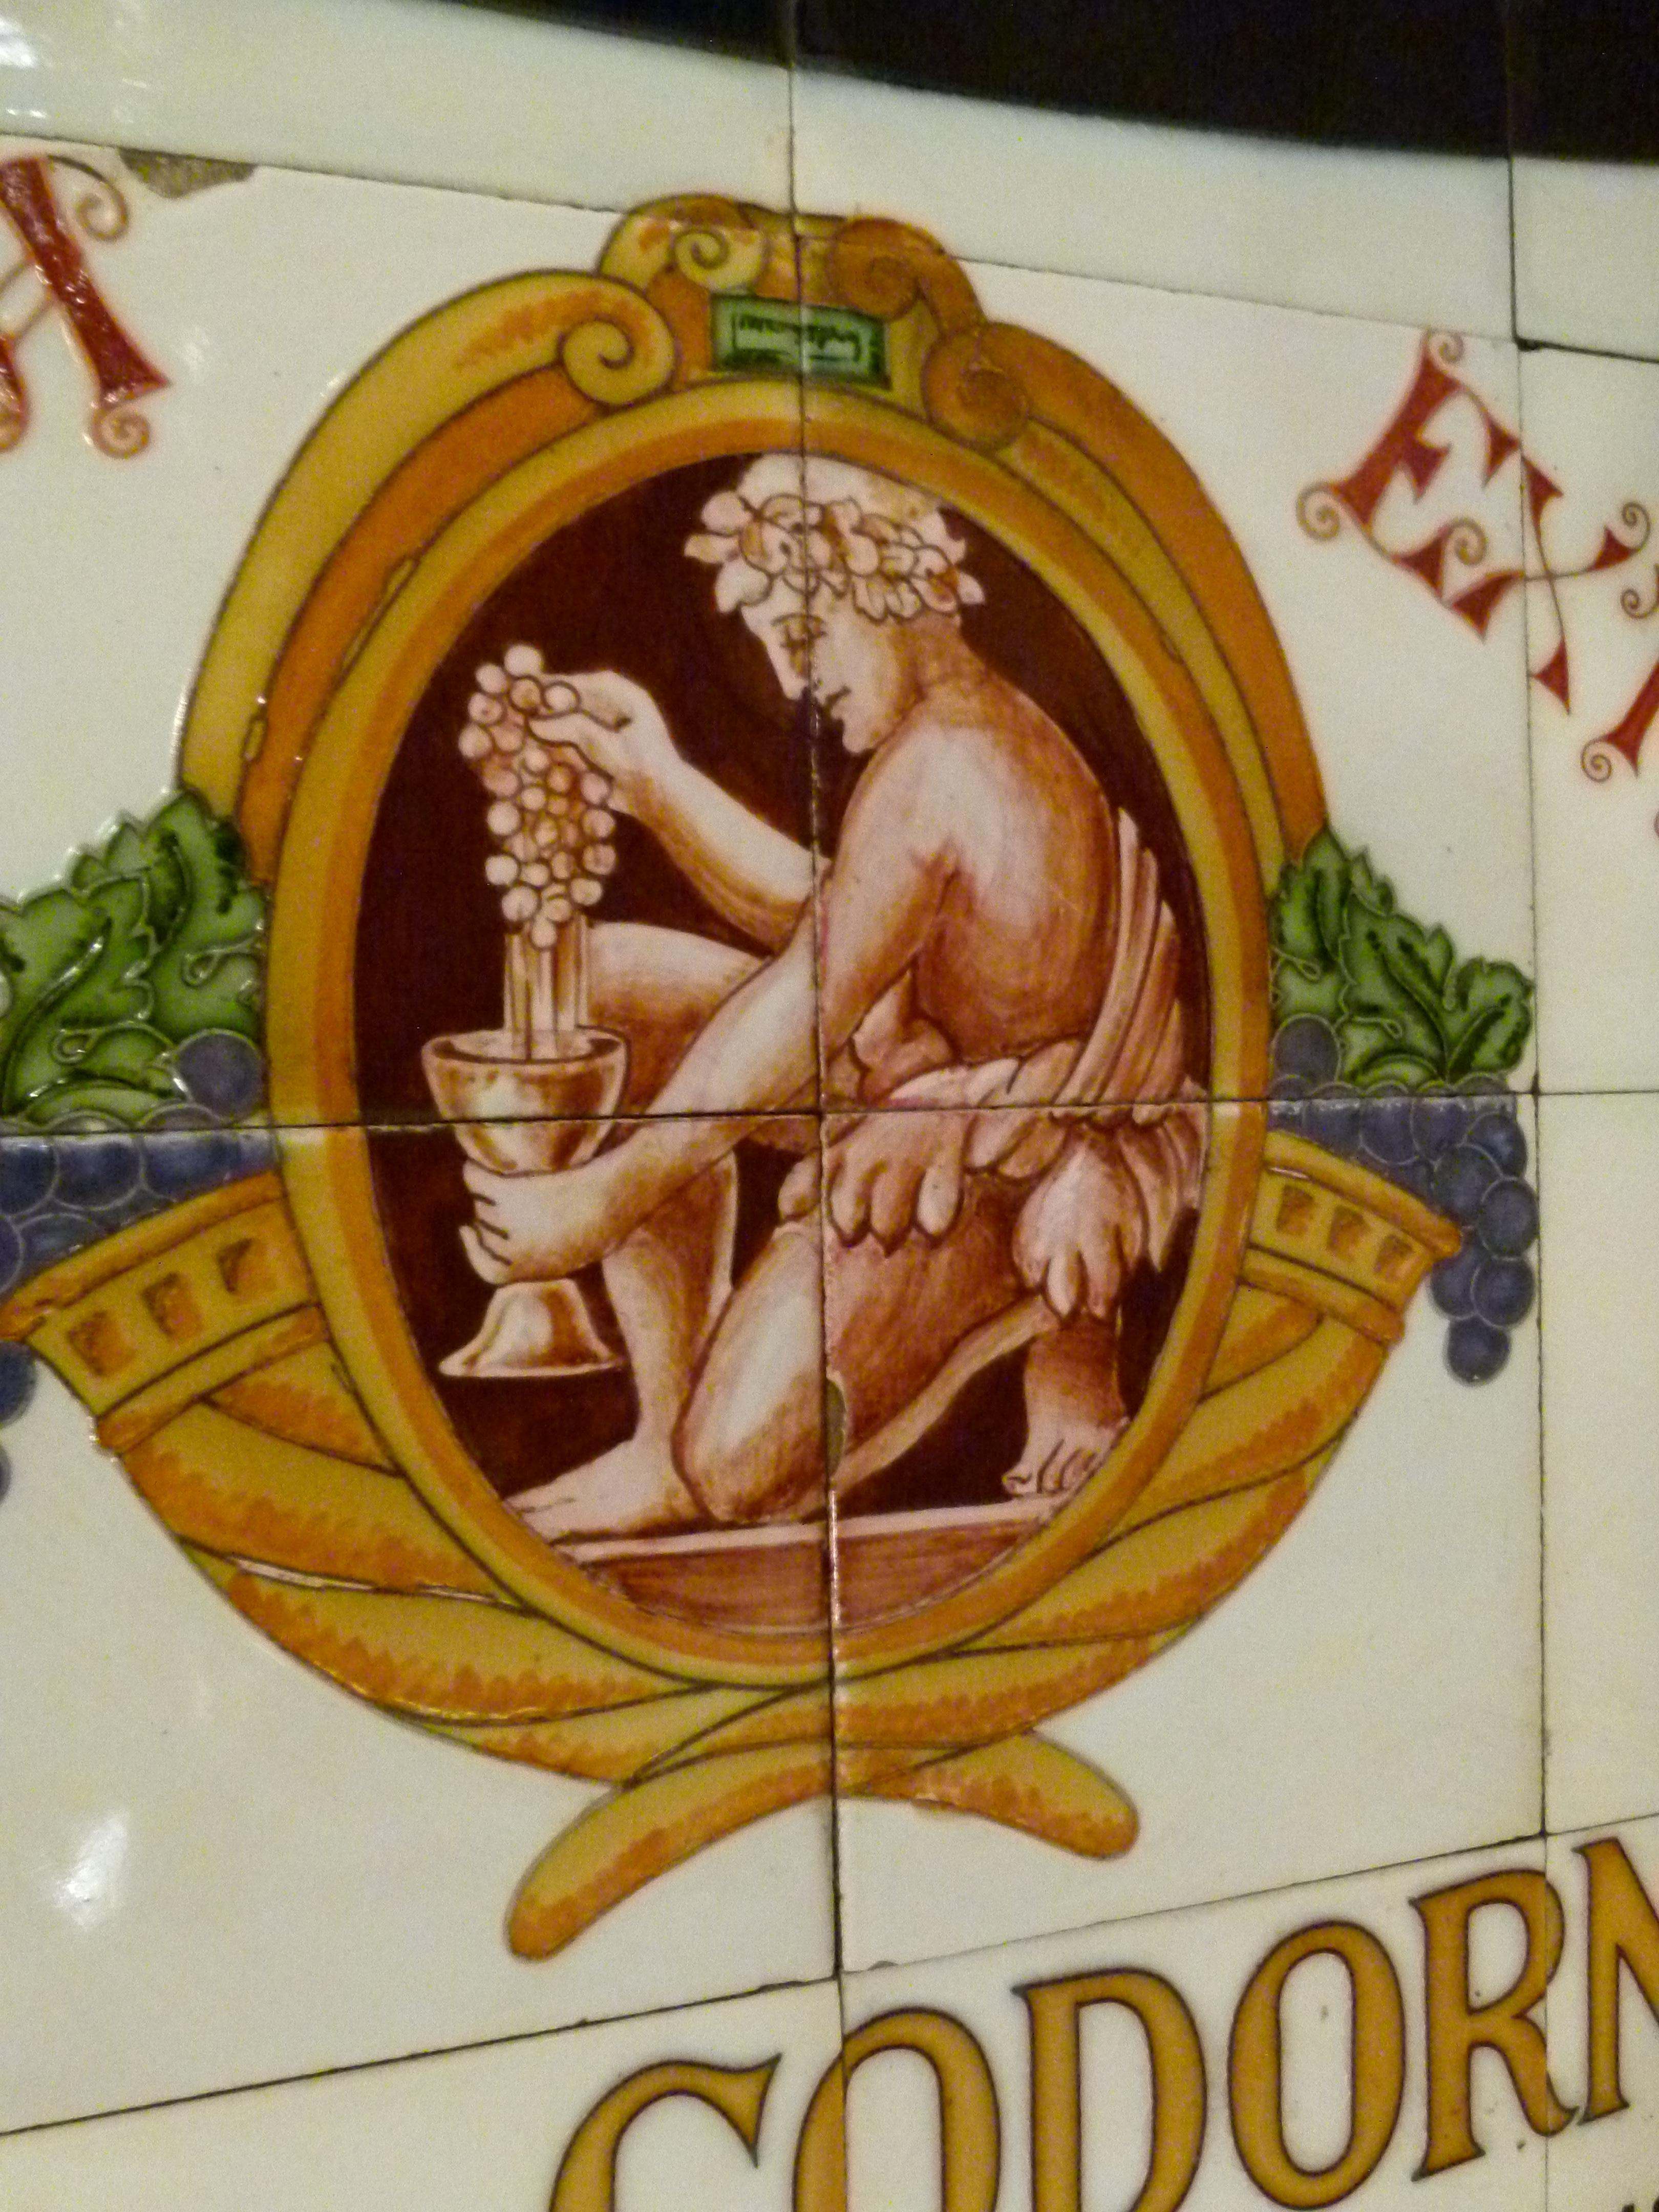 Art Nouveau advertising tile poster from Codorniu Cellar, Spain
Ceramic tiles measurements: 15x15 cm (6x6 in).

Codorníu is synonymous to the history of a family of winegrowers which goes back to the XVI century. It is the oldest family business